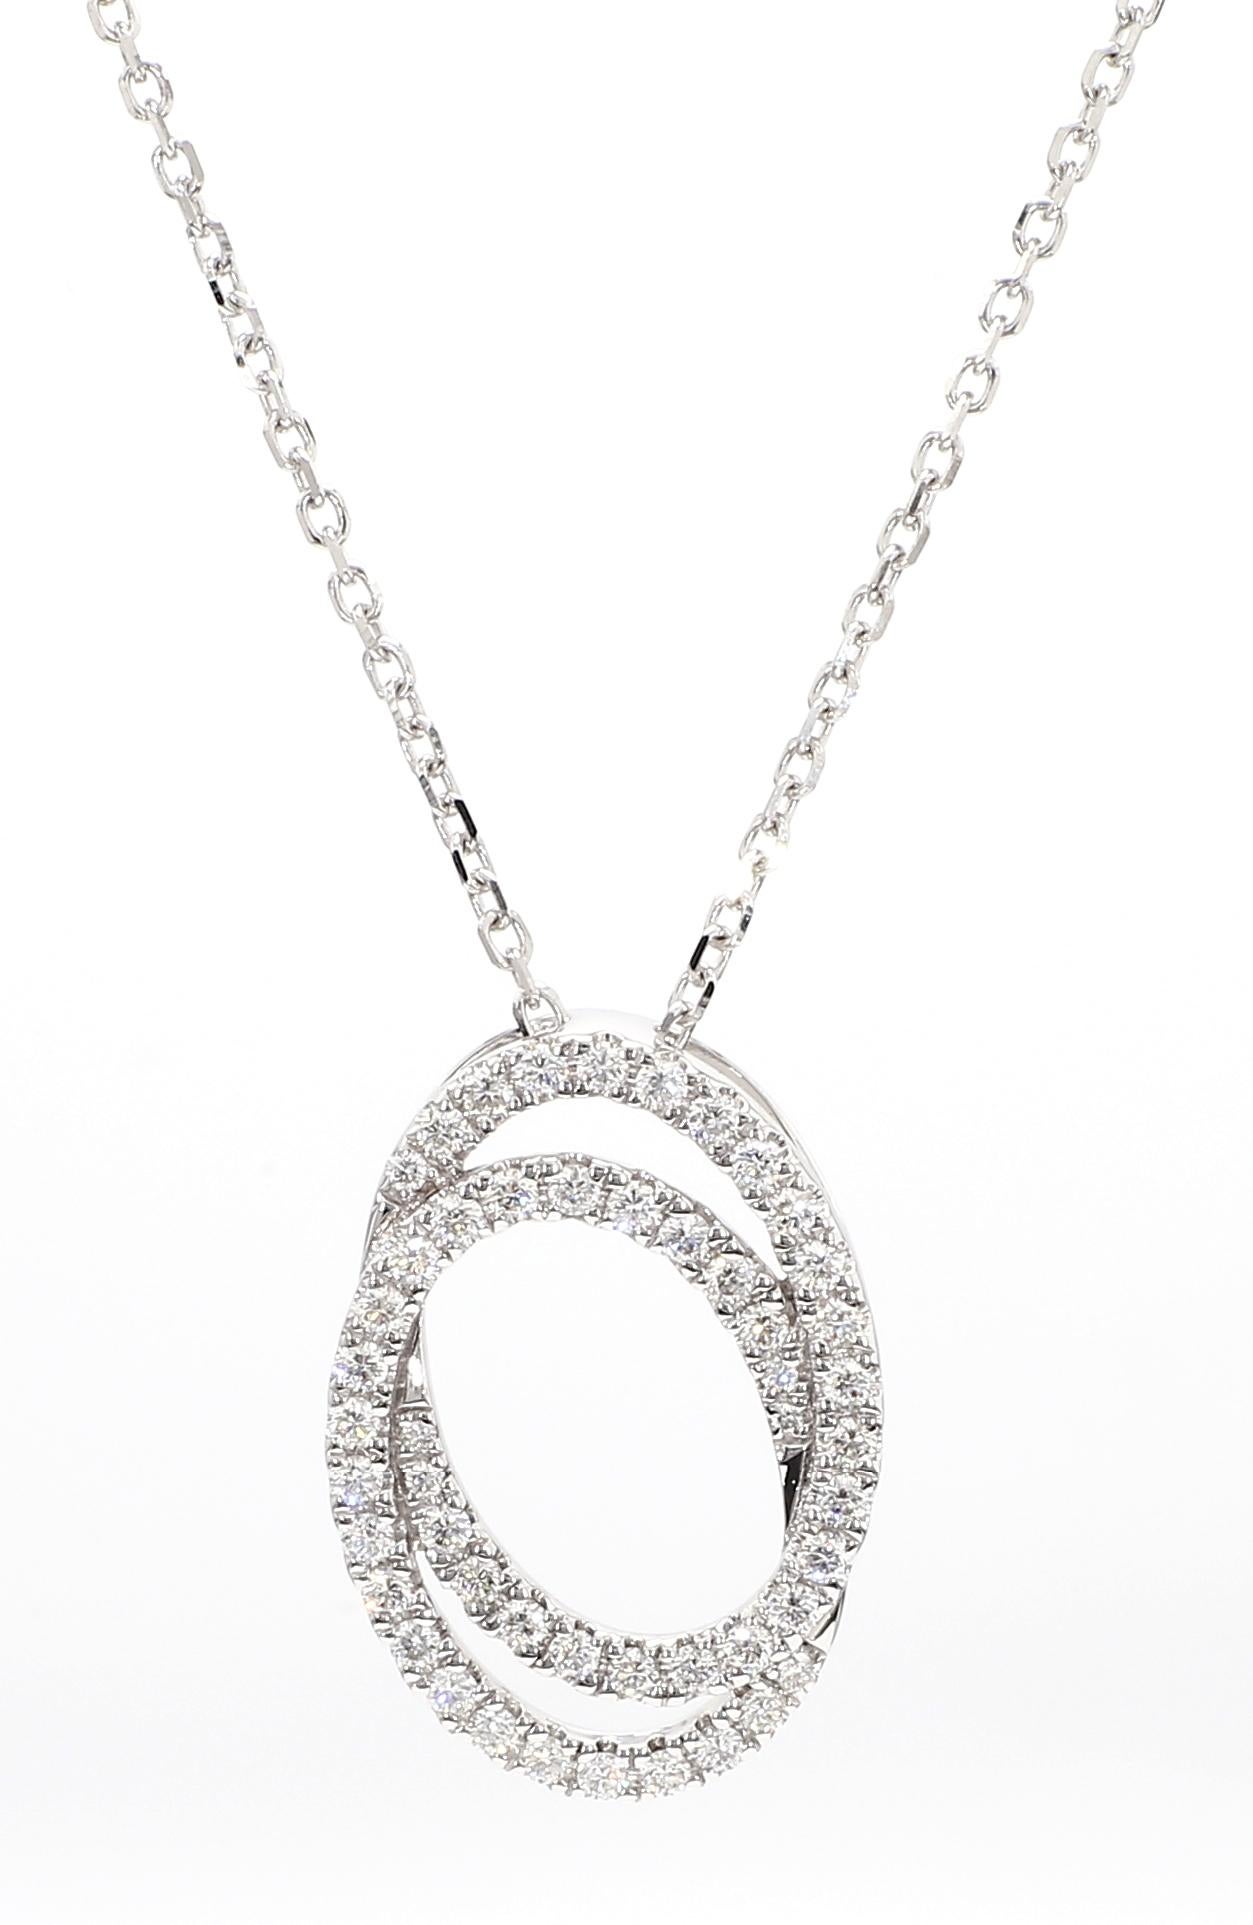 RareGemWorld's classic diamond pendant. Mounted in a beautiful 18K White Gold setting with natural round white diamond melee. This pendant is guaranteed to impress and enhance your personal collection.

Total Weight: 0.60cts

Length x Width: 21.6 x